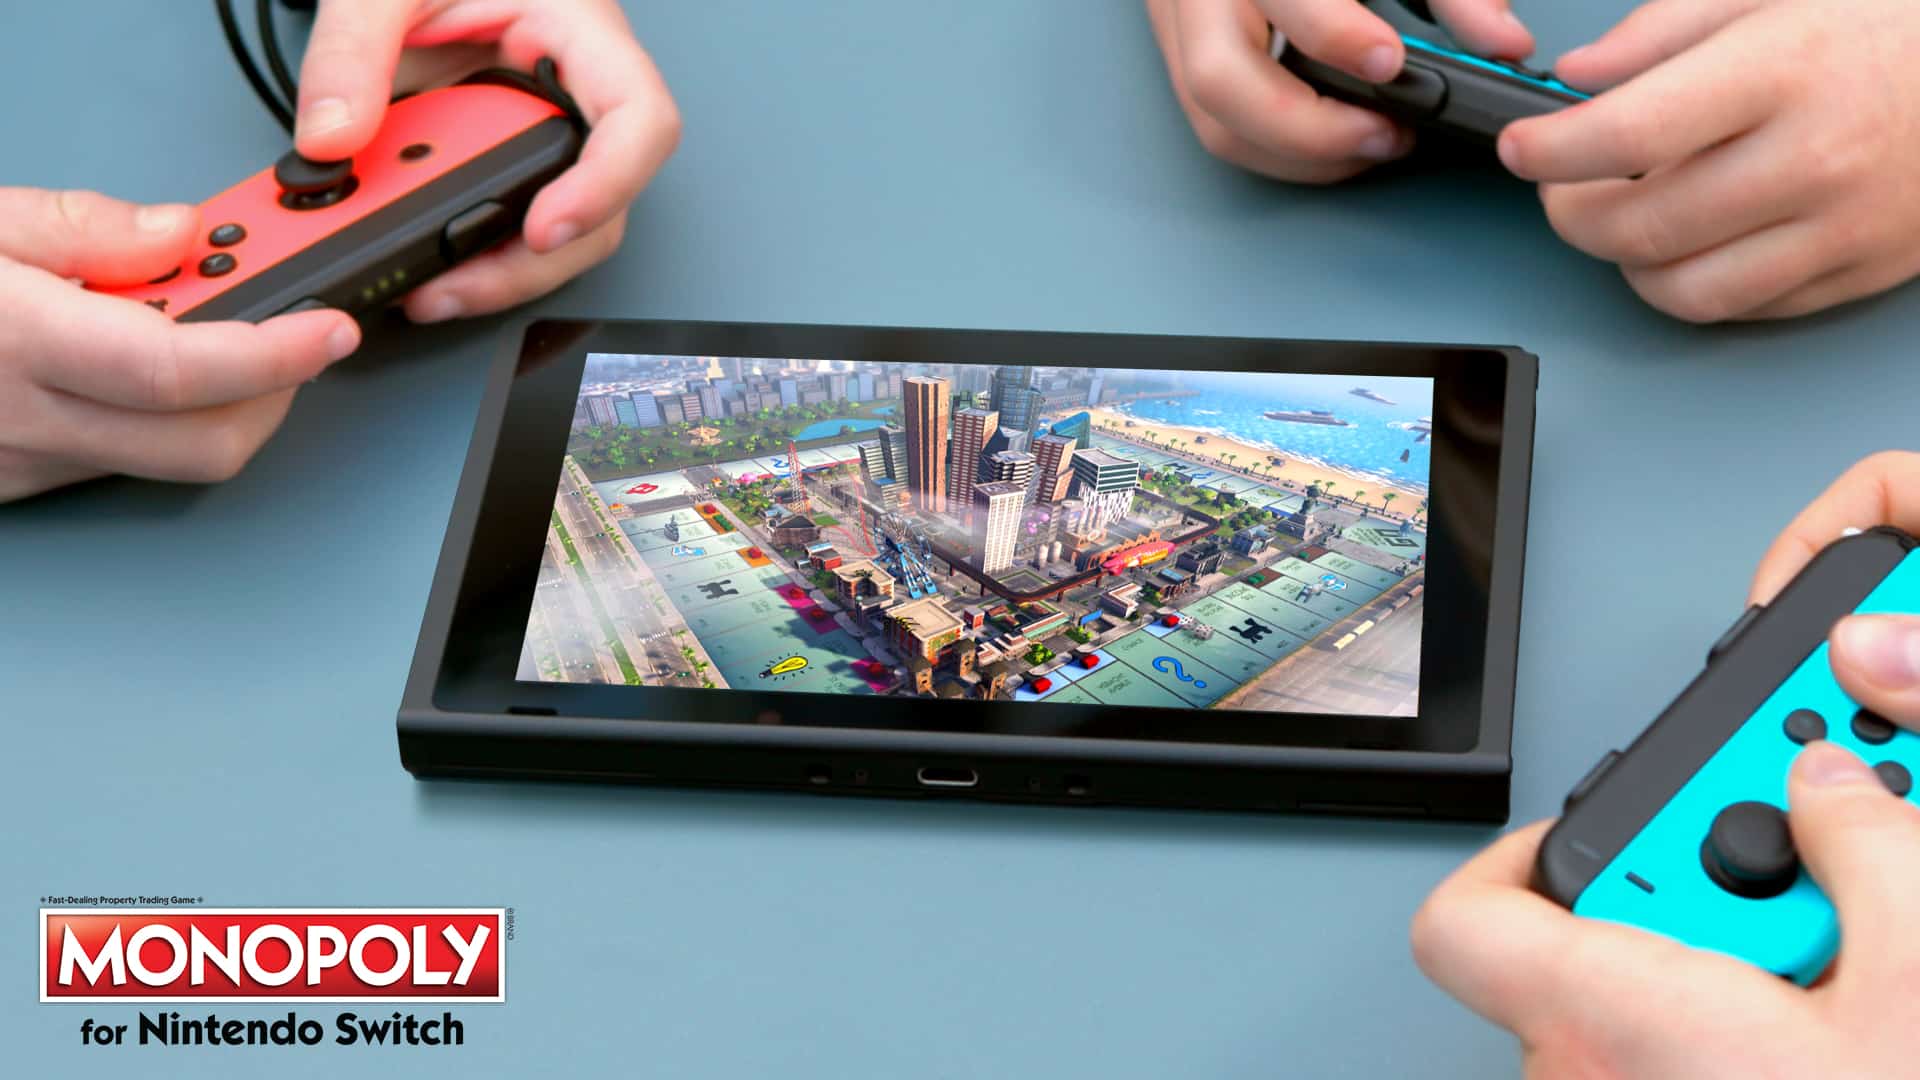 Monopoly for Nintendo Switch Promo Image 1